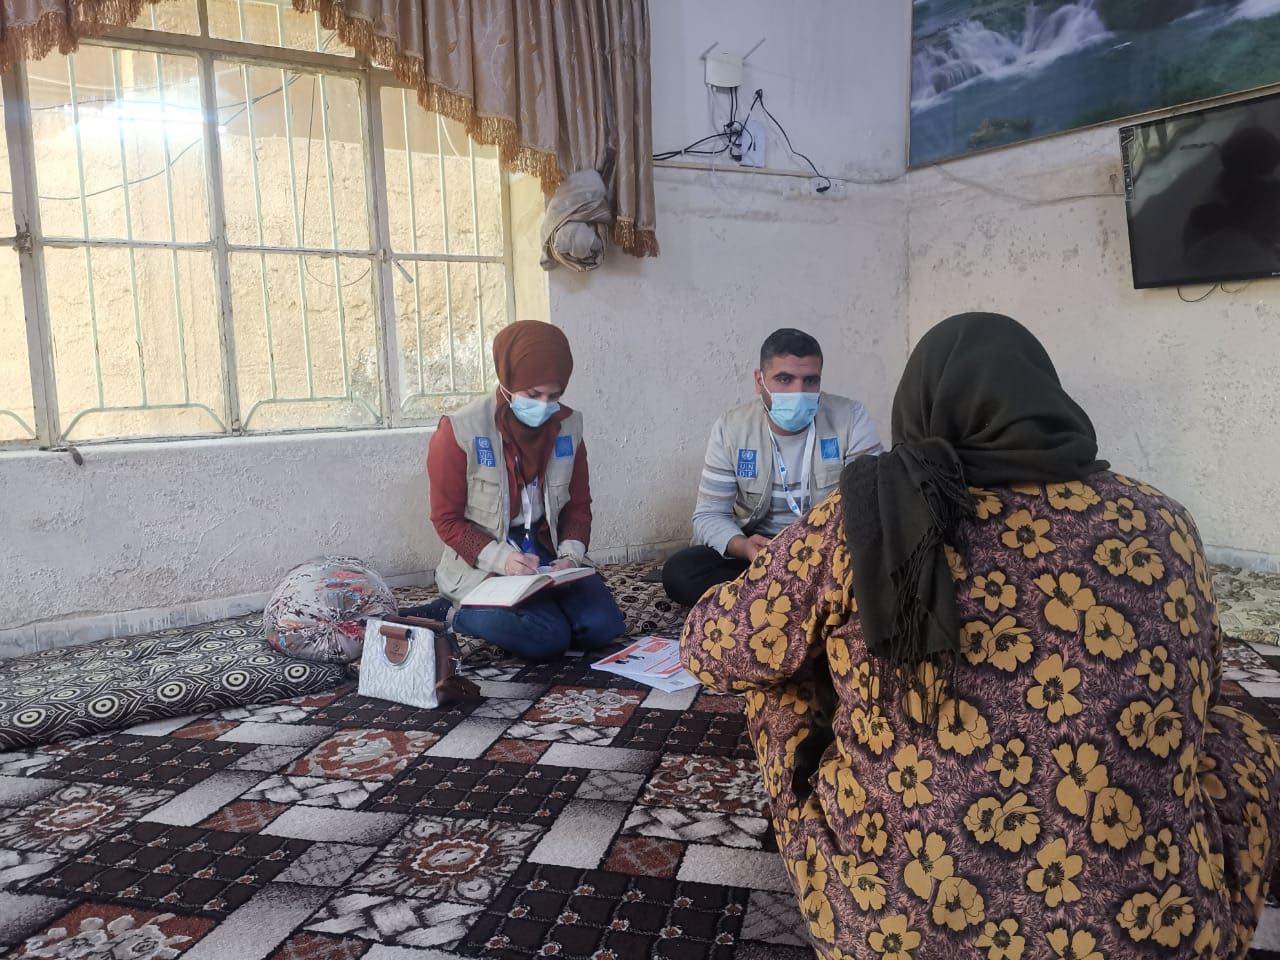 UNDP mental health workers interviewing a woman in Iraq.